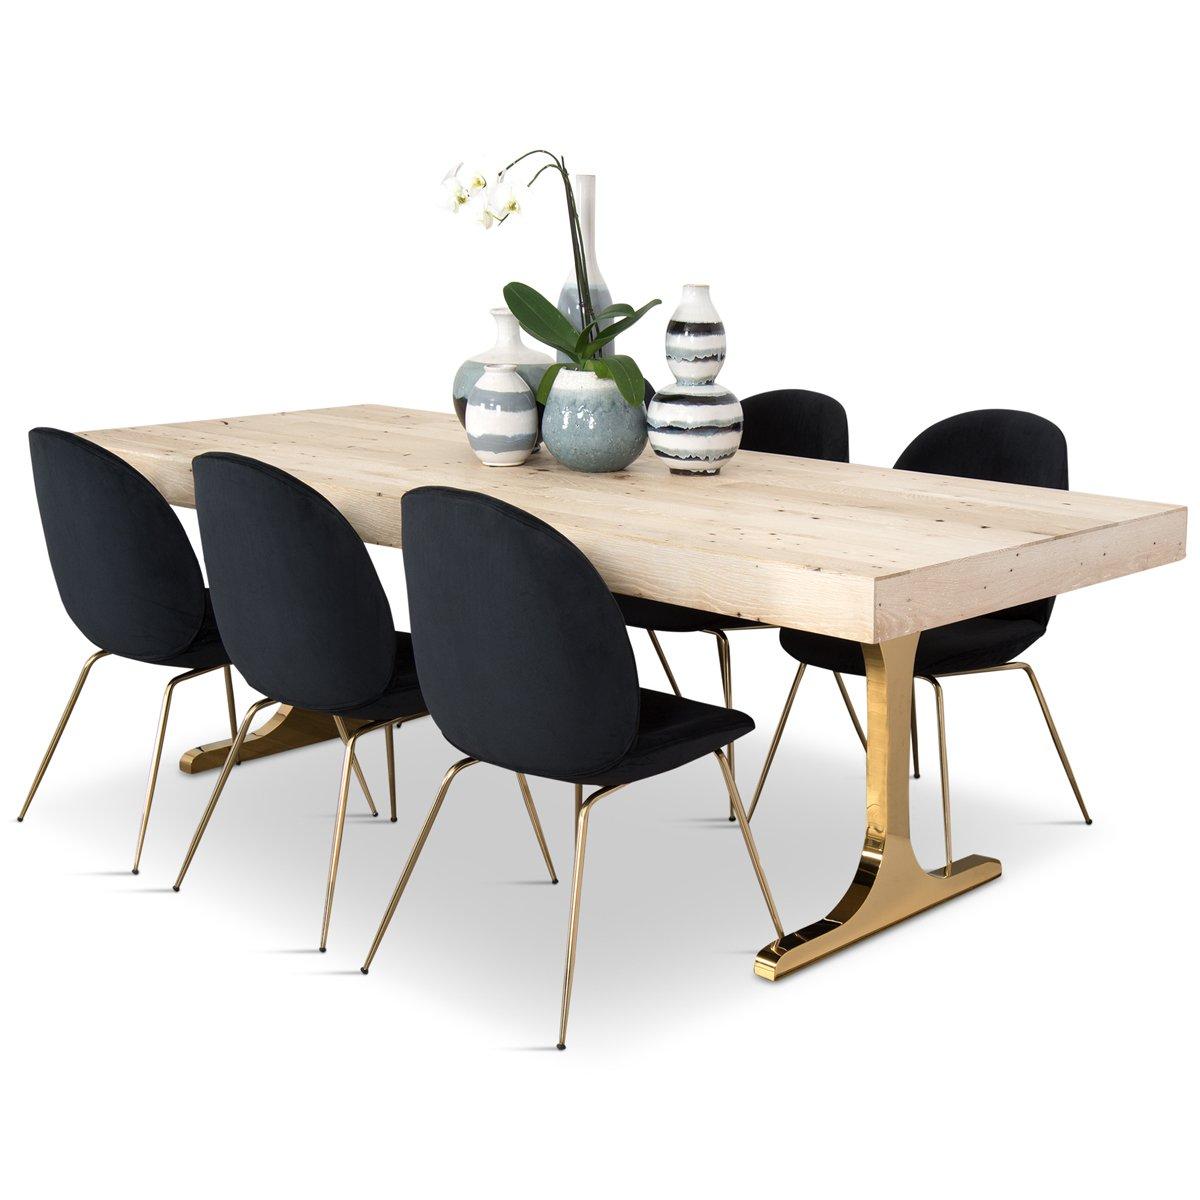 Introducing the Mykonos dining table. A whitewashed solid recycled oak top contrasts shiny brass T-legs in this eye-catching piece. This dining table features the natural beauty and character of recycled oak- each knot, hole, or feature has a story